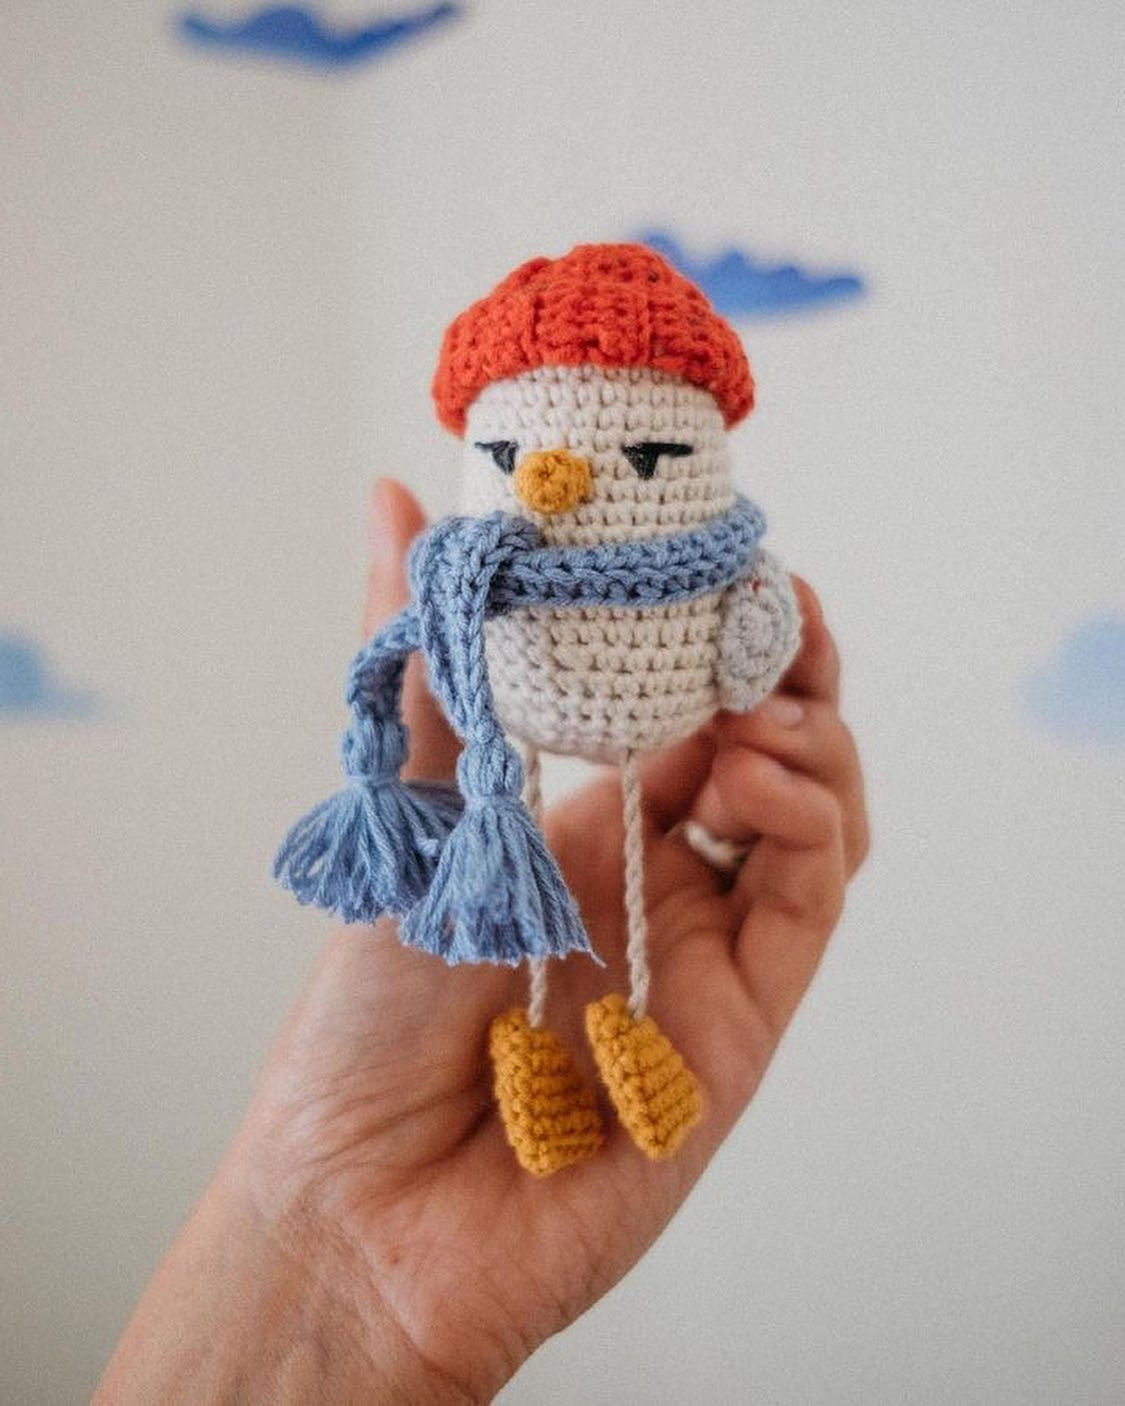 Crochet pattern for a chicken wearing a hat and scarf.